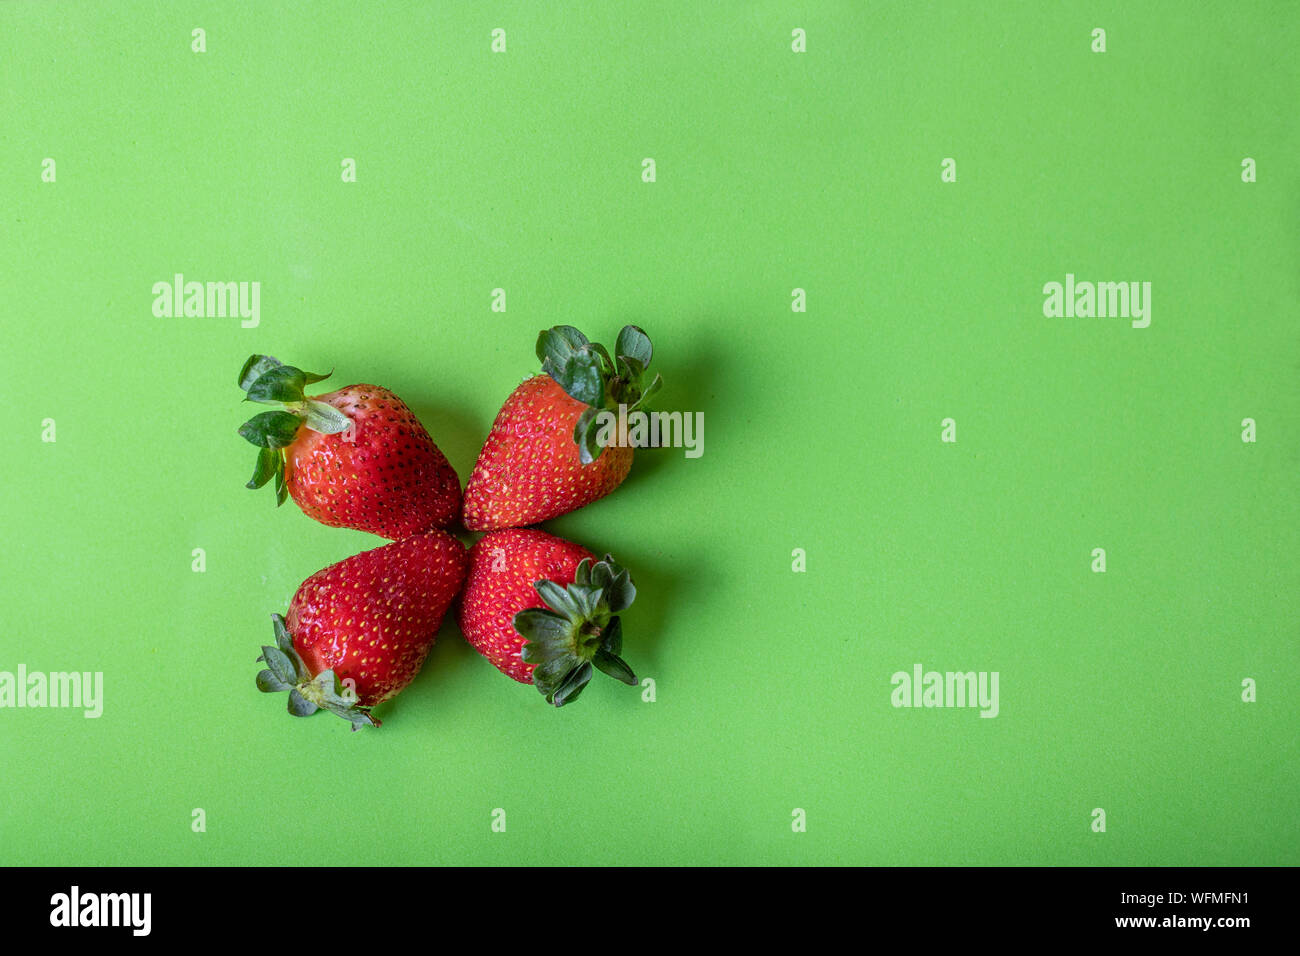 Strawberries are beautiful and tasty, a simple presentation with a vibrant background. Stock Photo